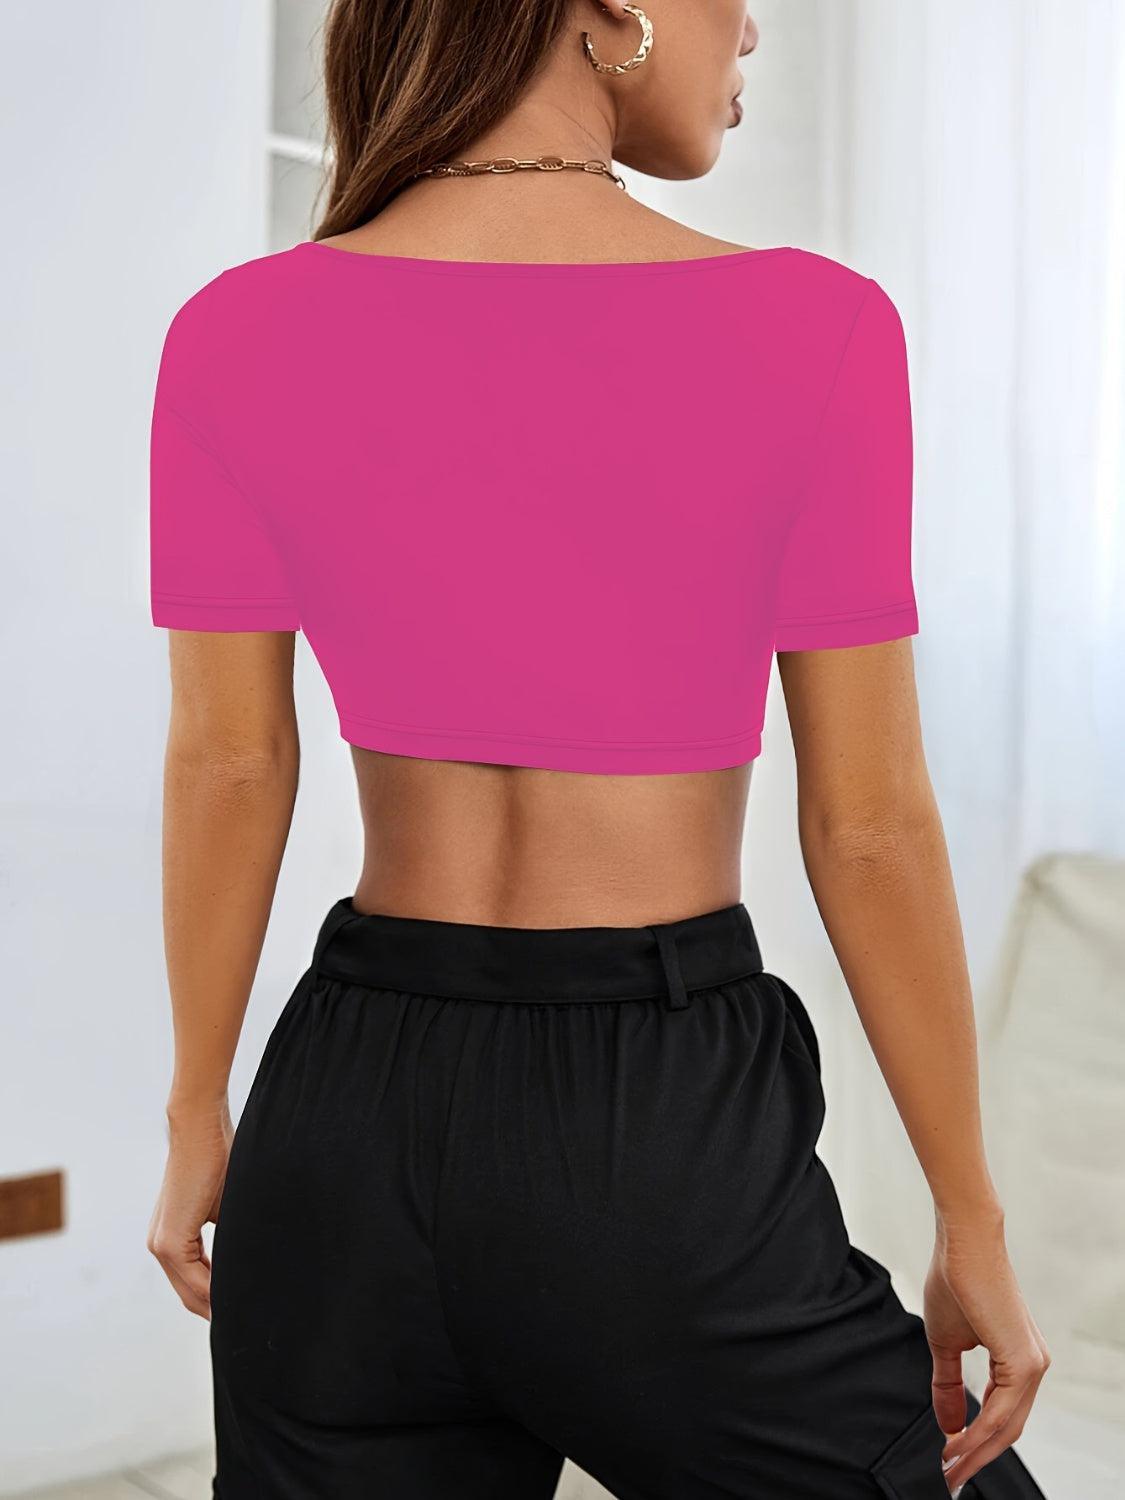 a woman wearing a pink crop top and black pants